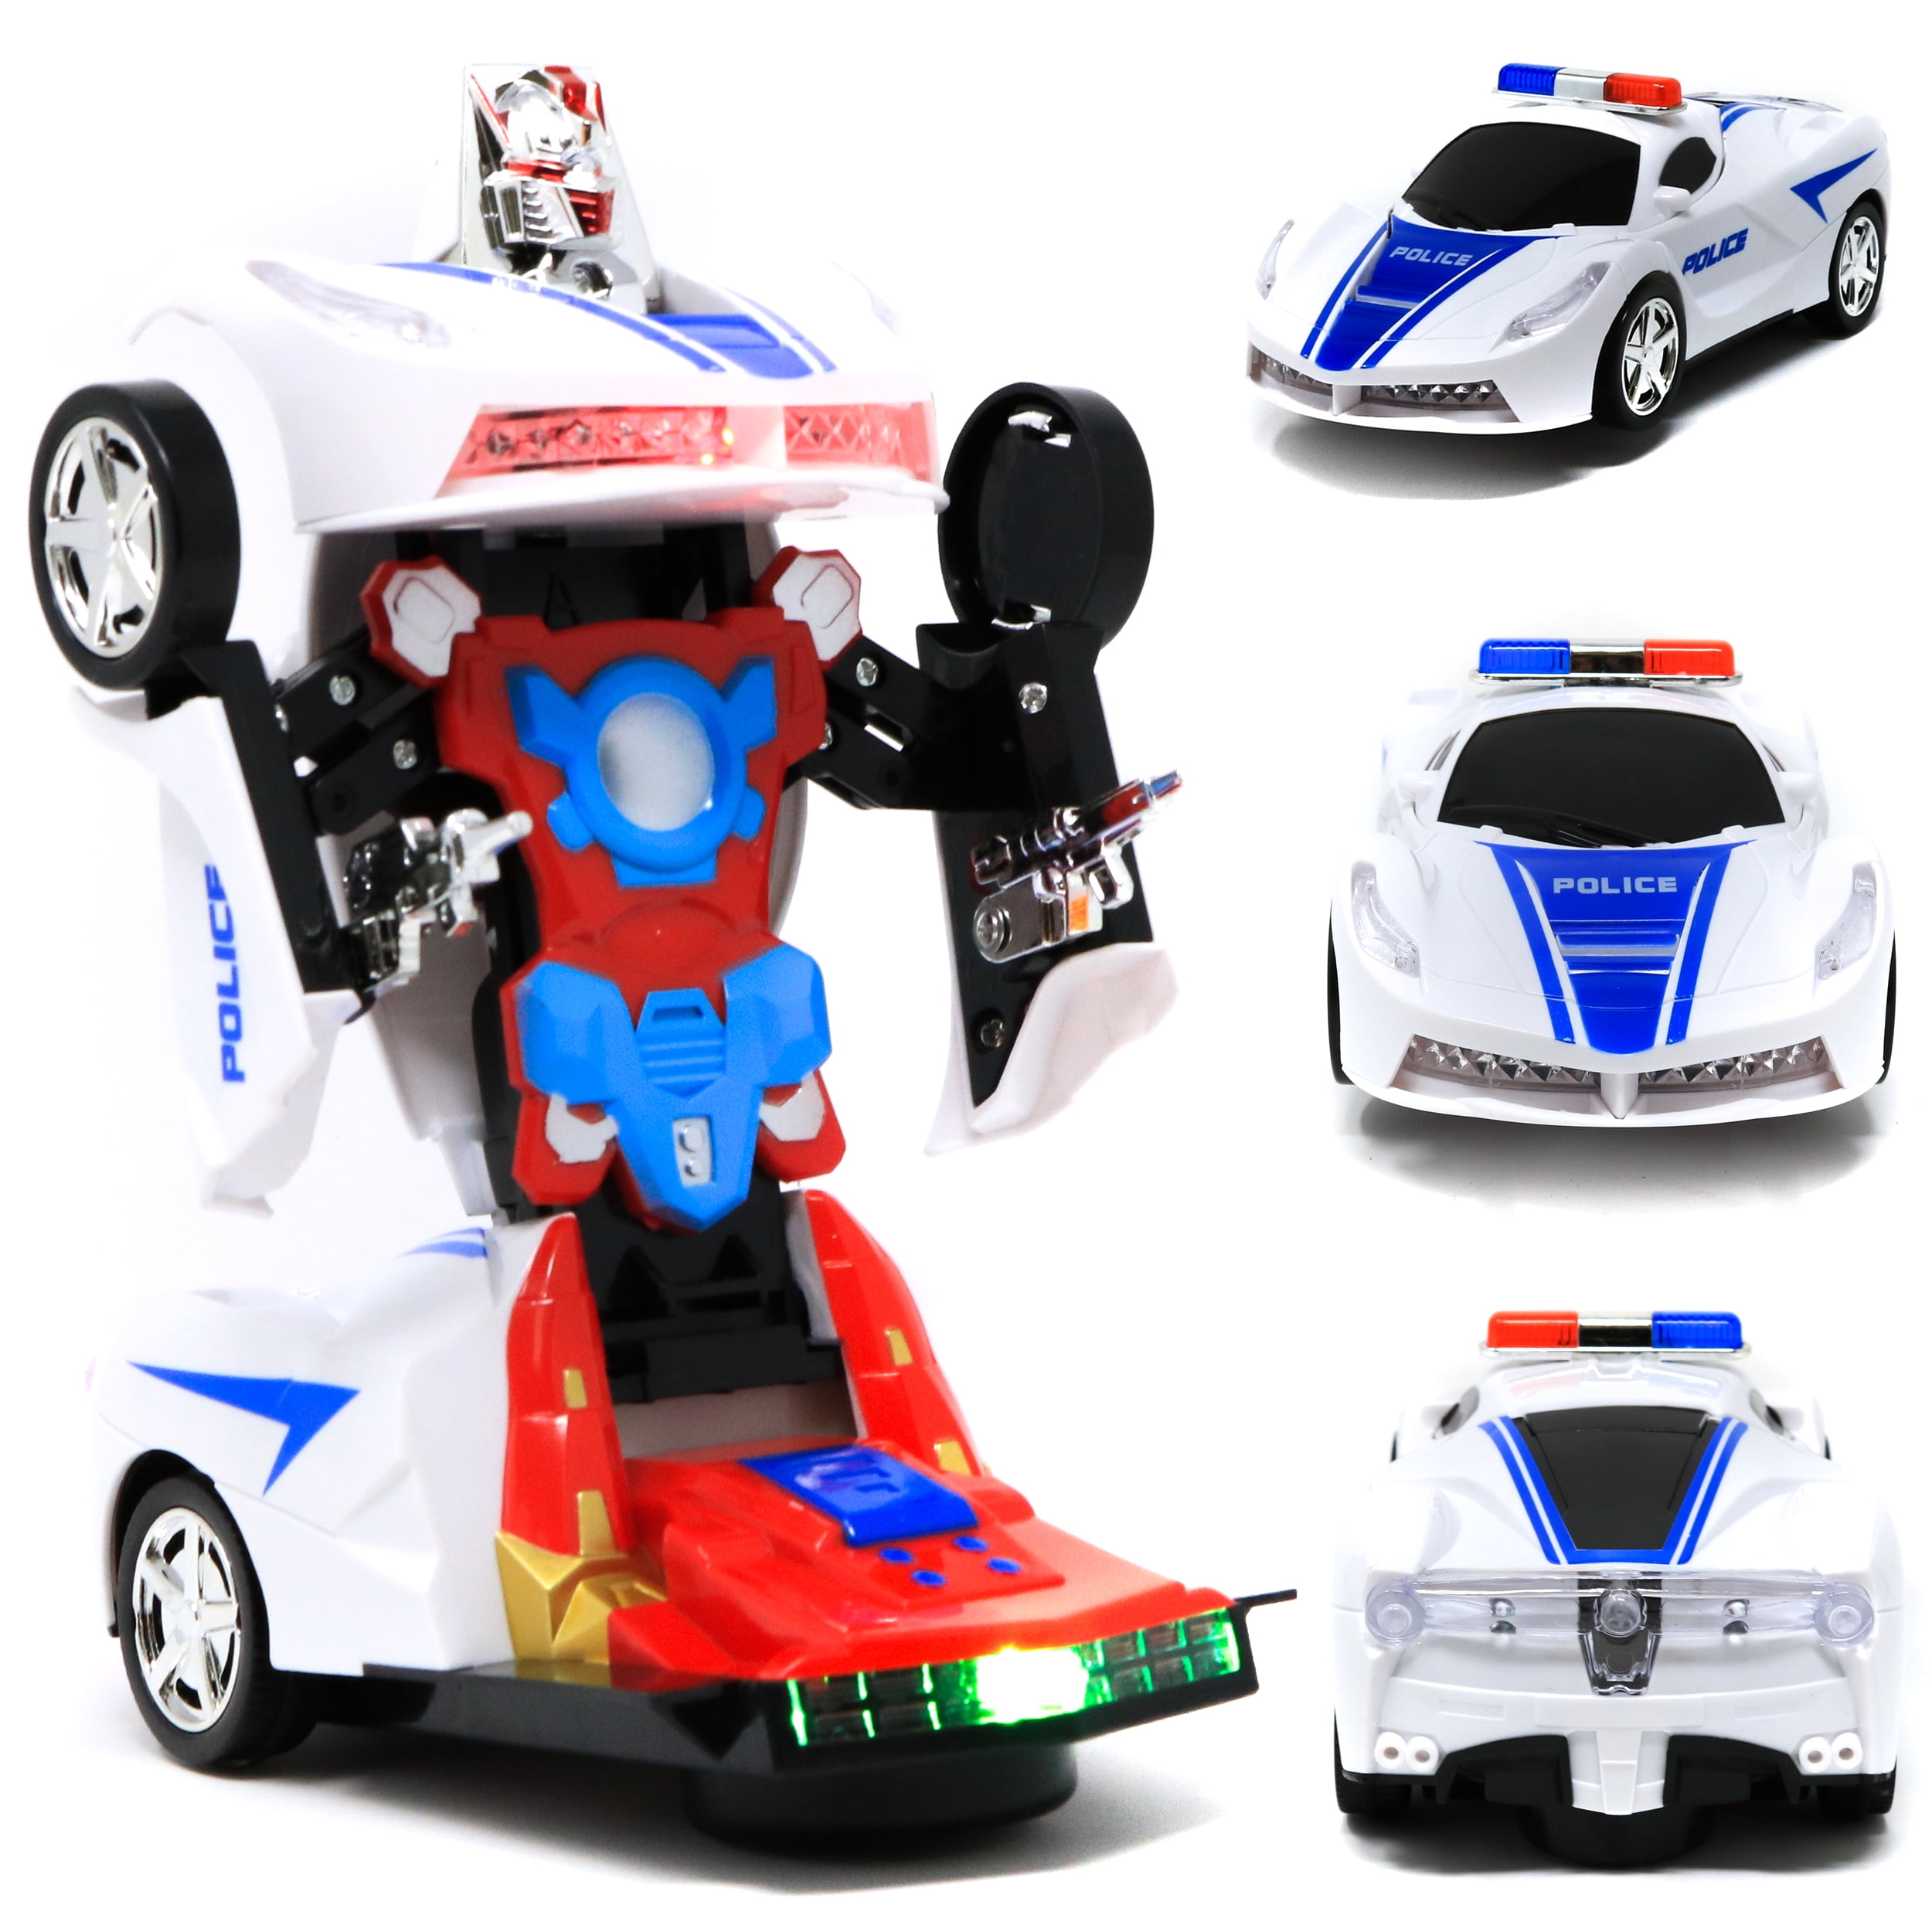 Transformers Robot Police Car Toy Lights Sounds Bump and Go Action Gift Toy Kids 